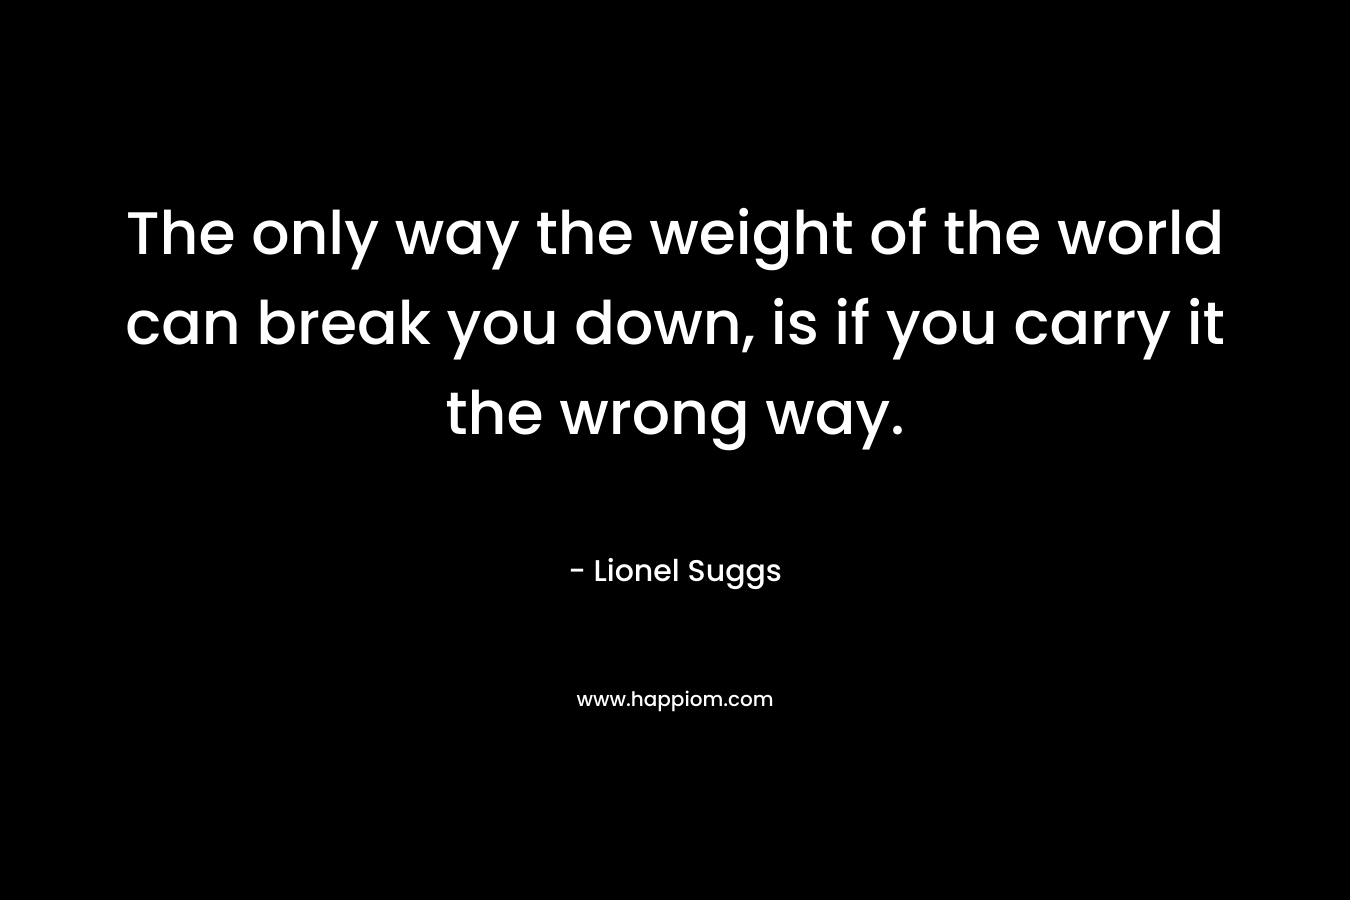 The only way the weight of the world can break you down, is if you carry it the wrong way. – Lionel Suggs